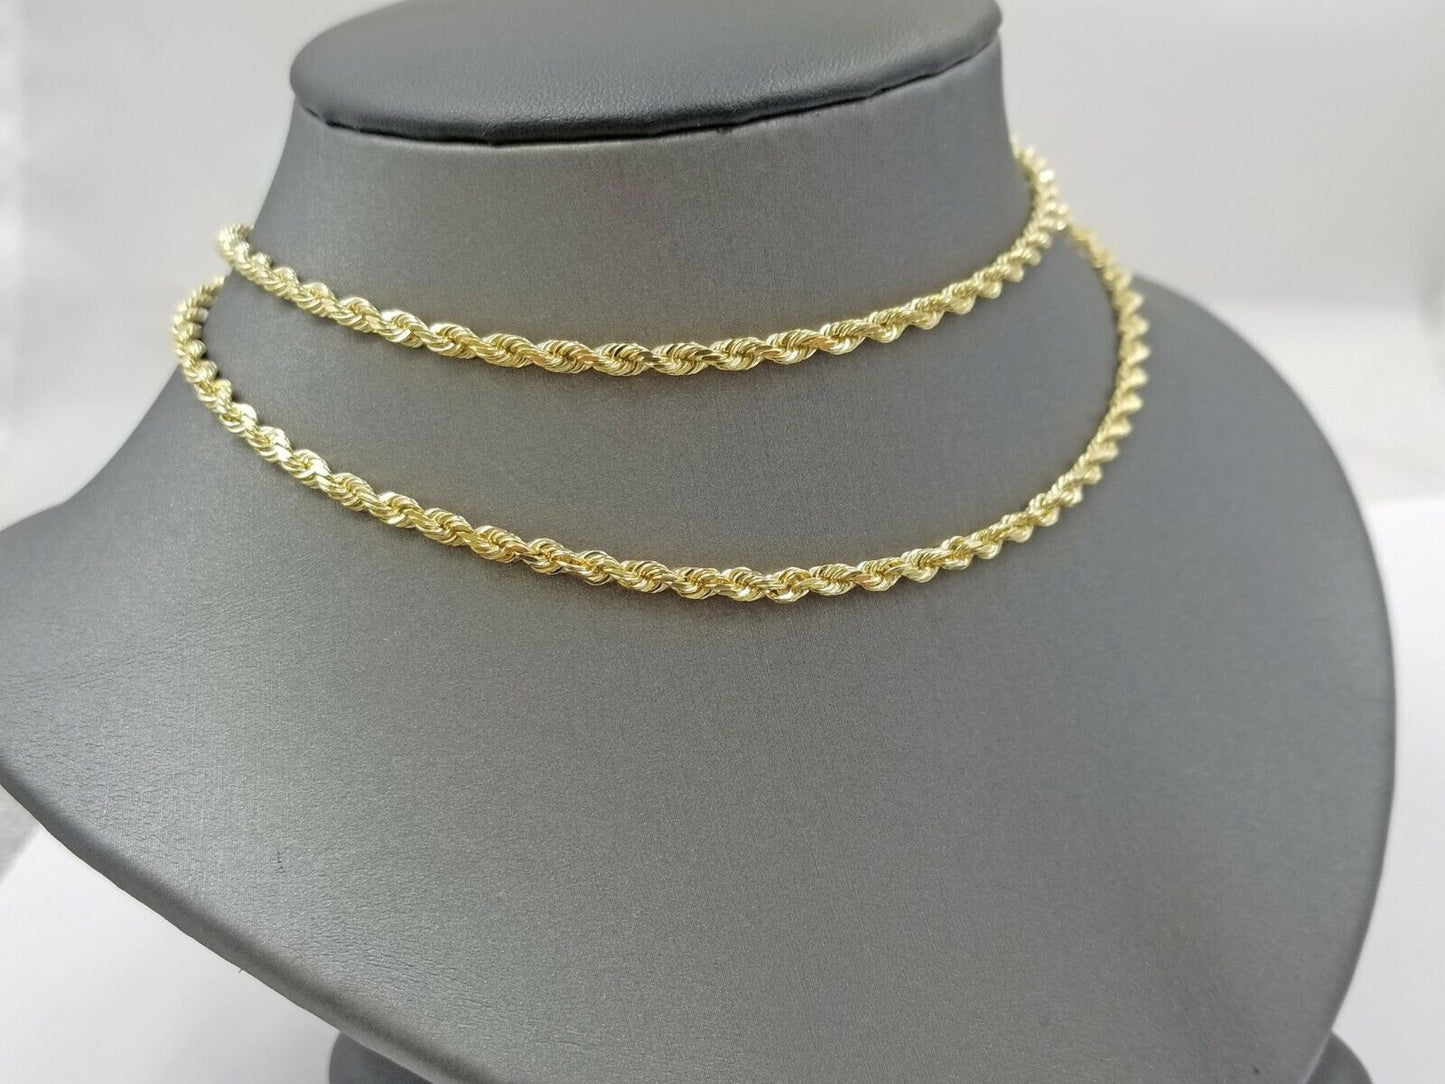 Real 18k Solid Yellow Gold Rope Chain 2mm Diamond Cut 22" Inches Lobster Lock